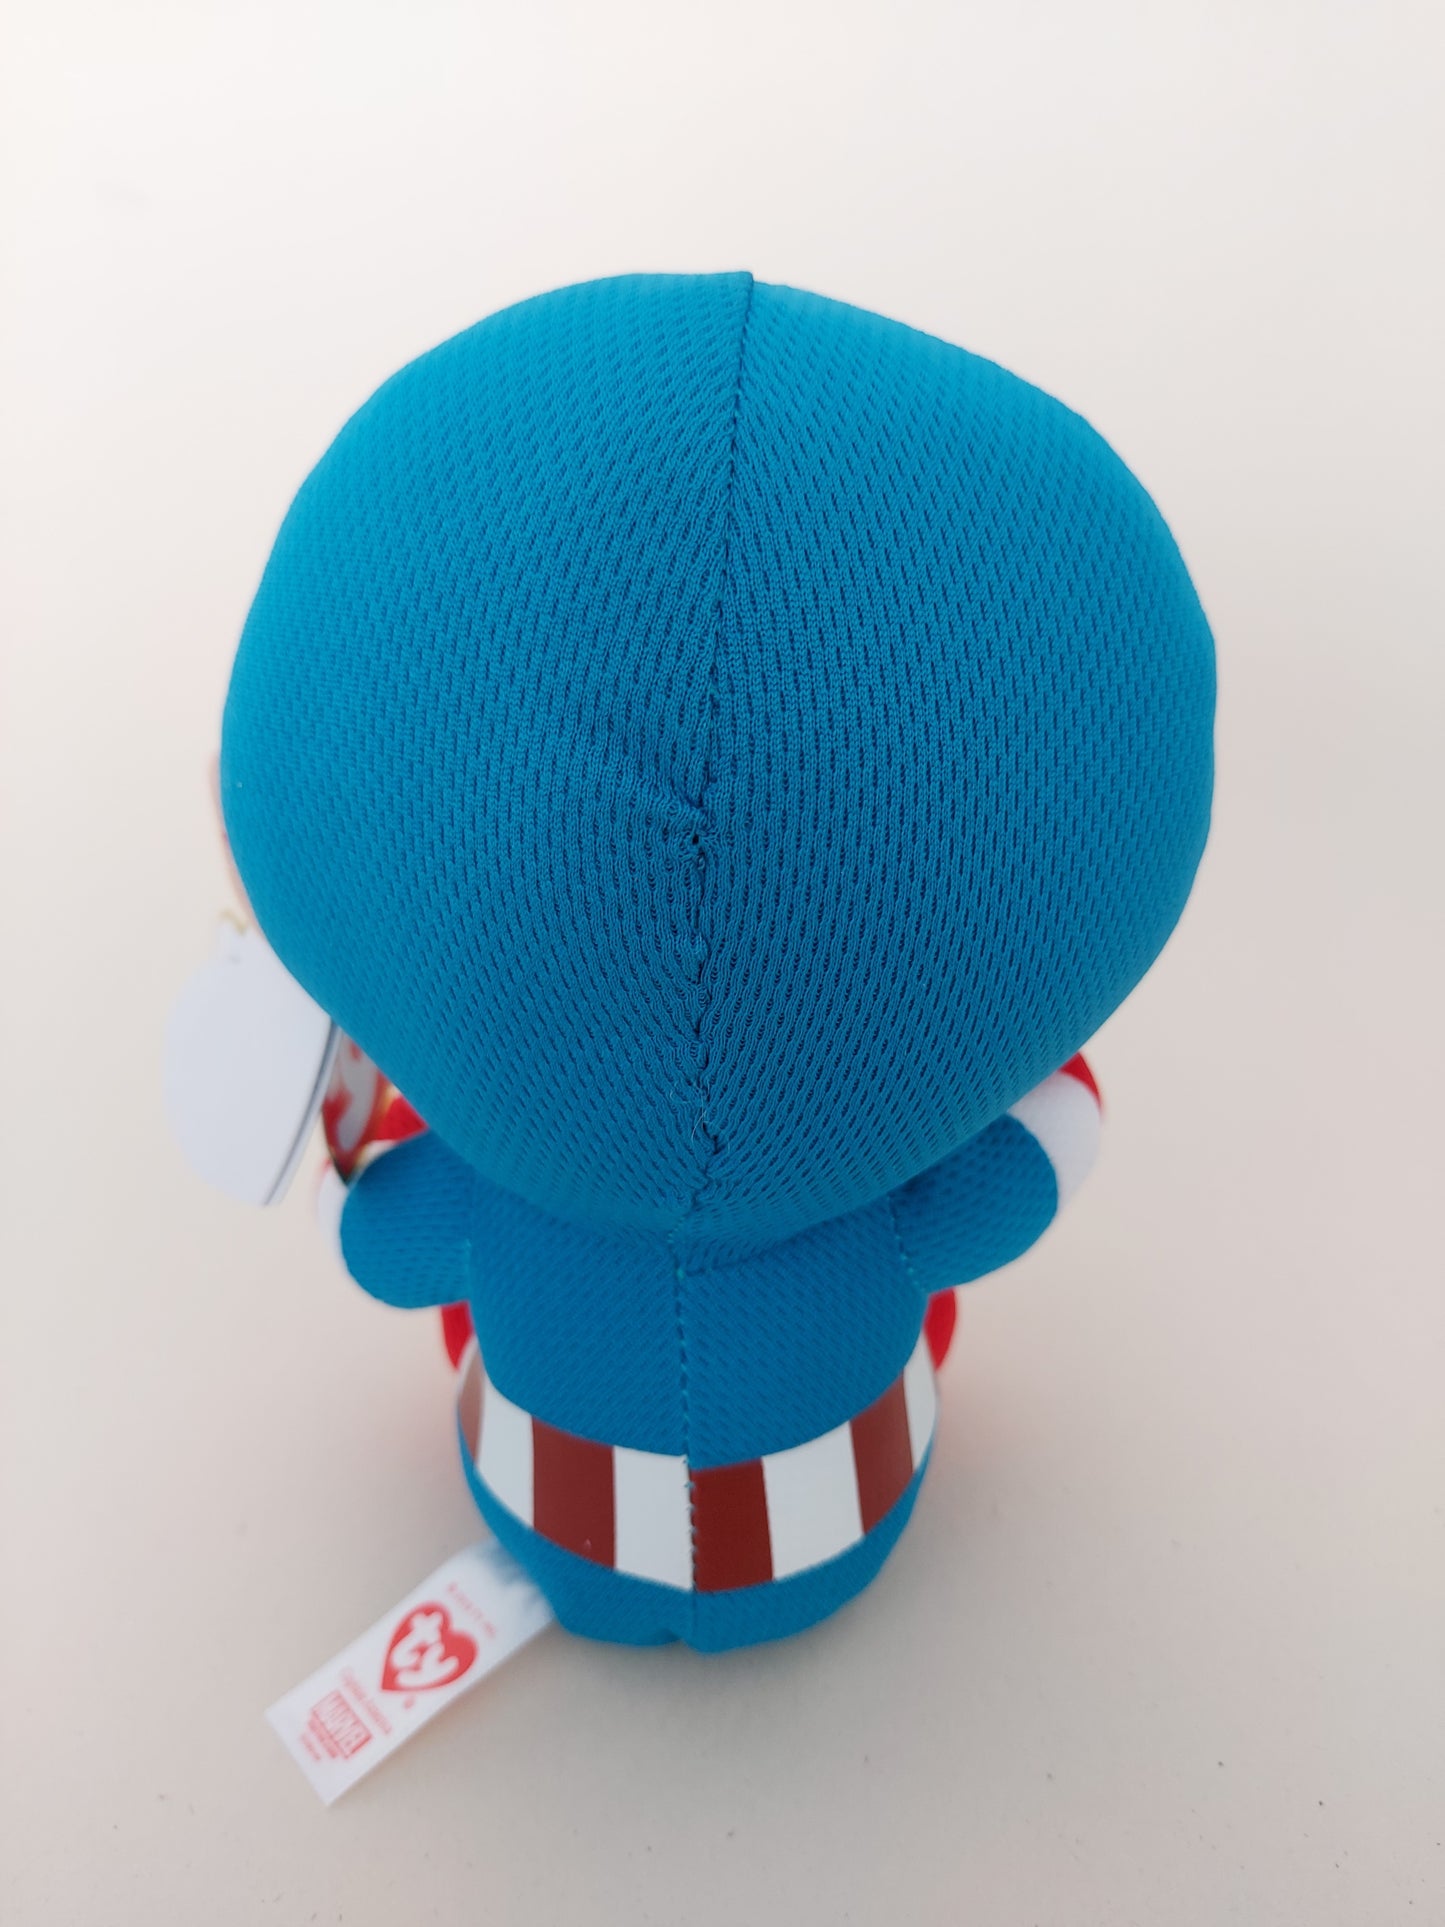 ty soft toy ,captain america